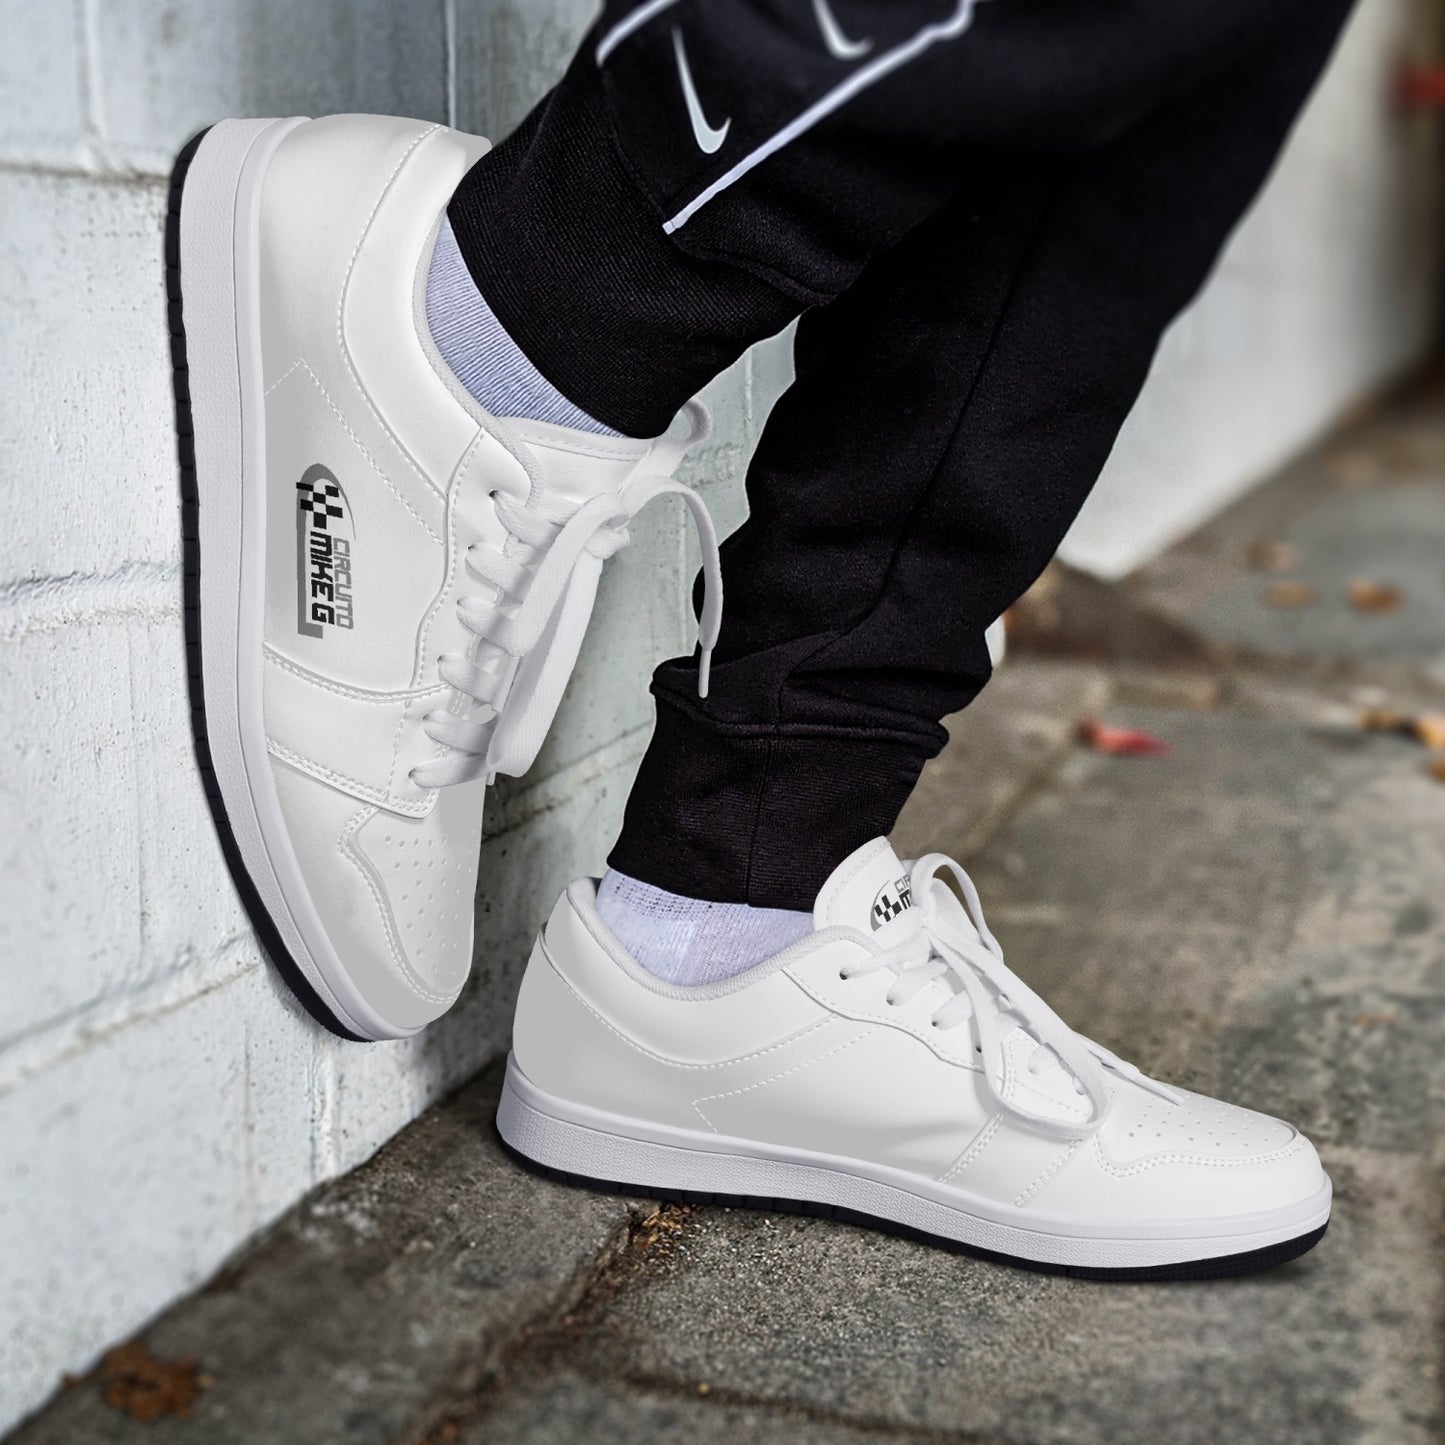 CIRCUITO MIKE G Low-Top Leather Sneakers - circuit white